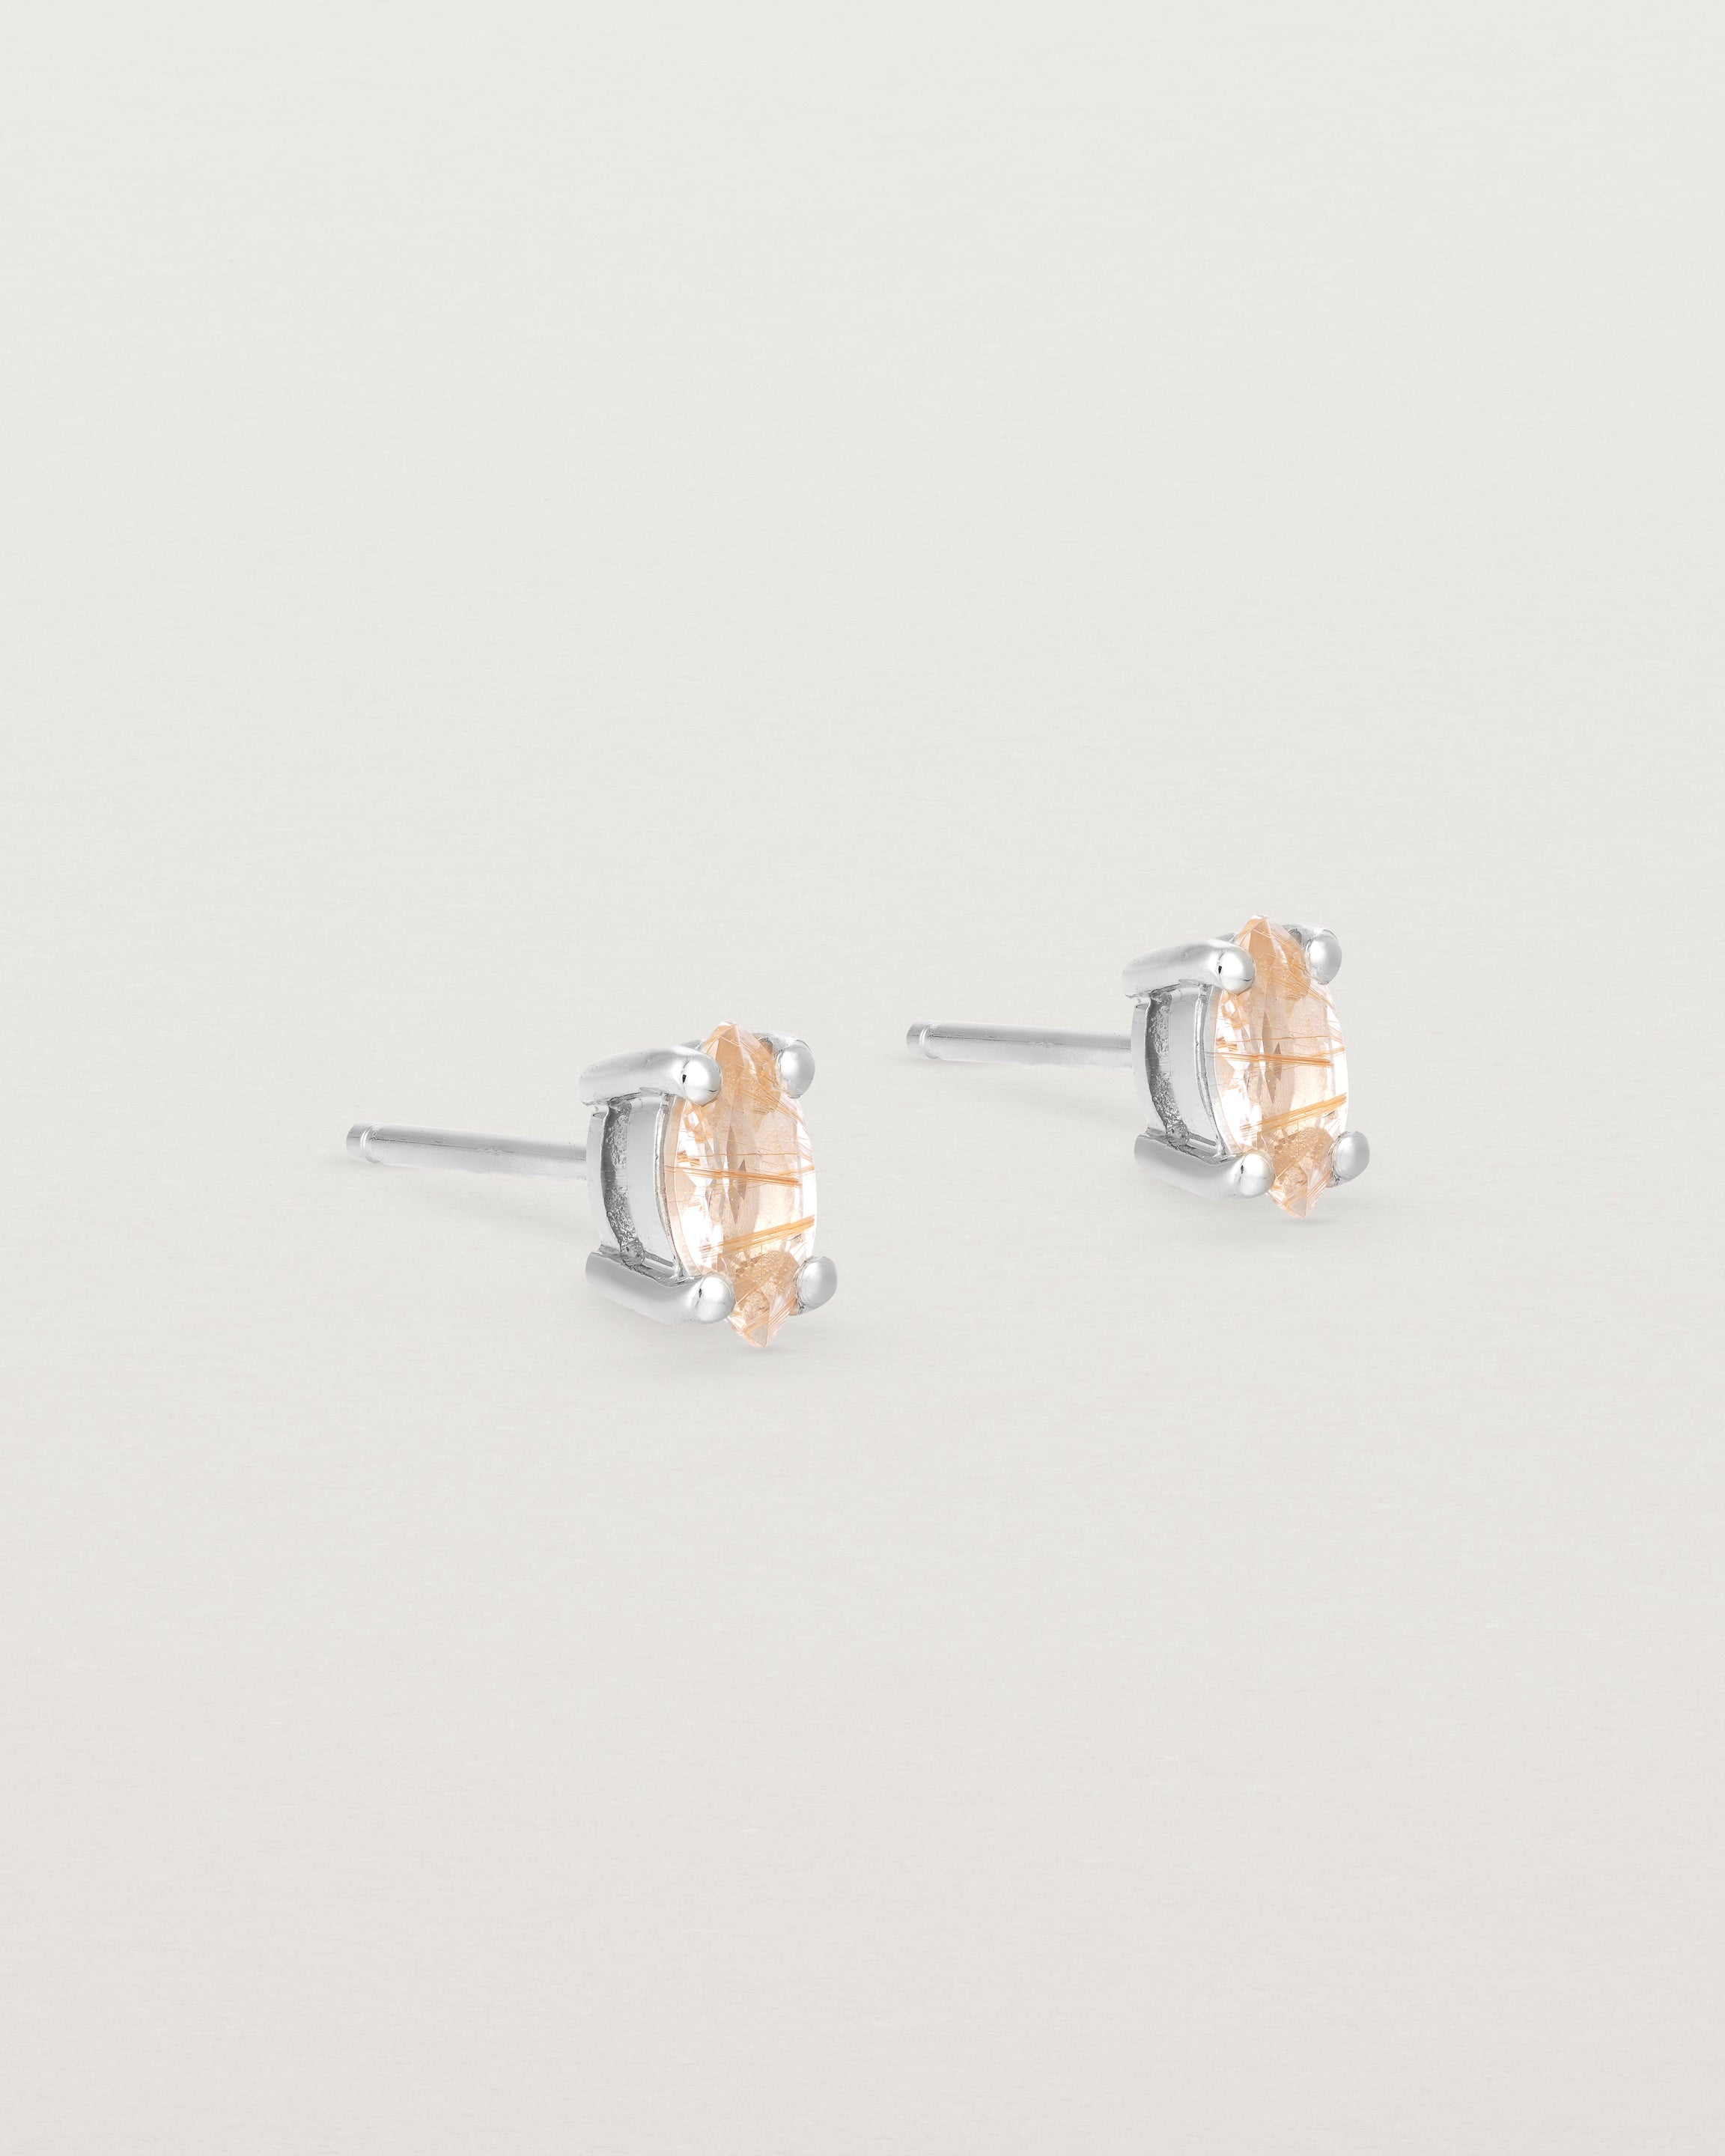 A pair of sterling silver studs featuring a marquise shaped light yellow rutilated quartz